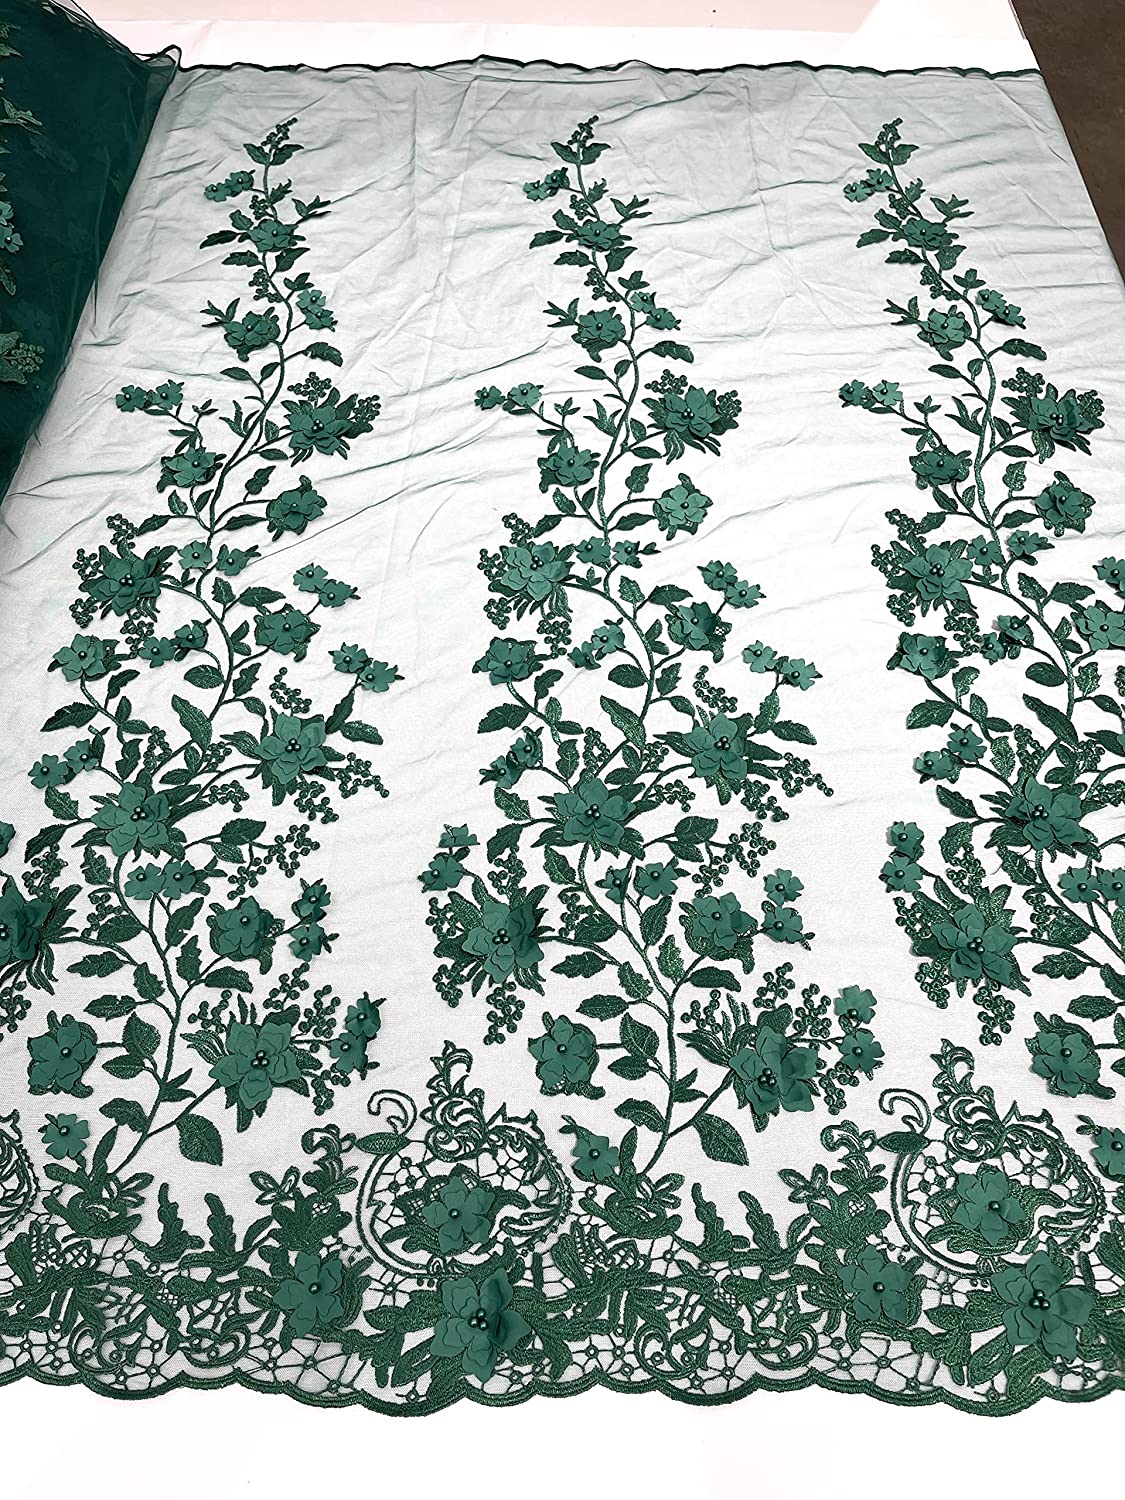 Emily 3-D Floral Design Embroider with Pearls On A Mesh Lace Fabric (1 Yard, Hunter Green)